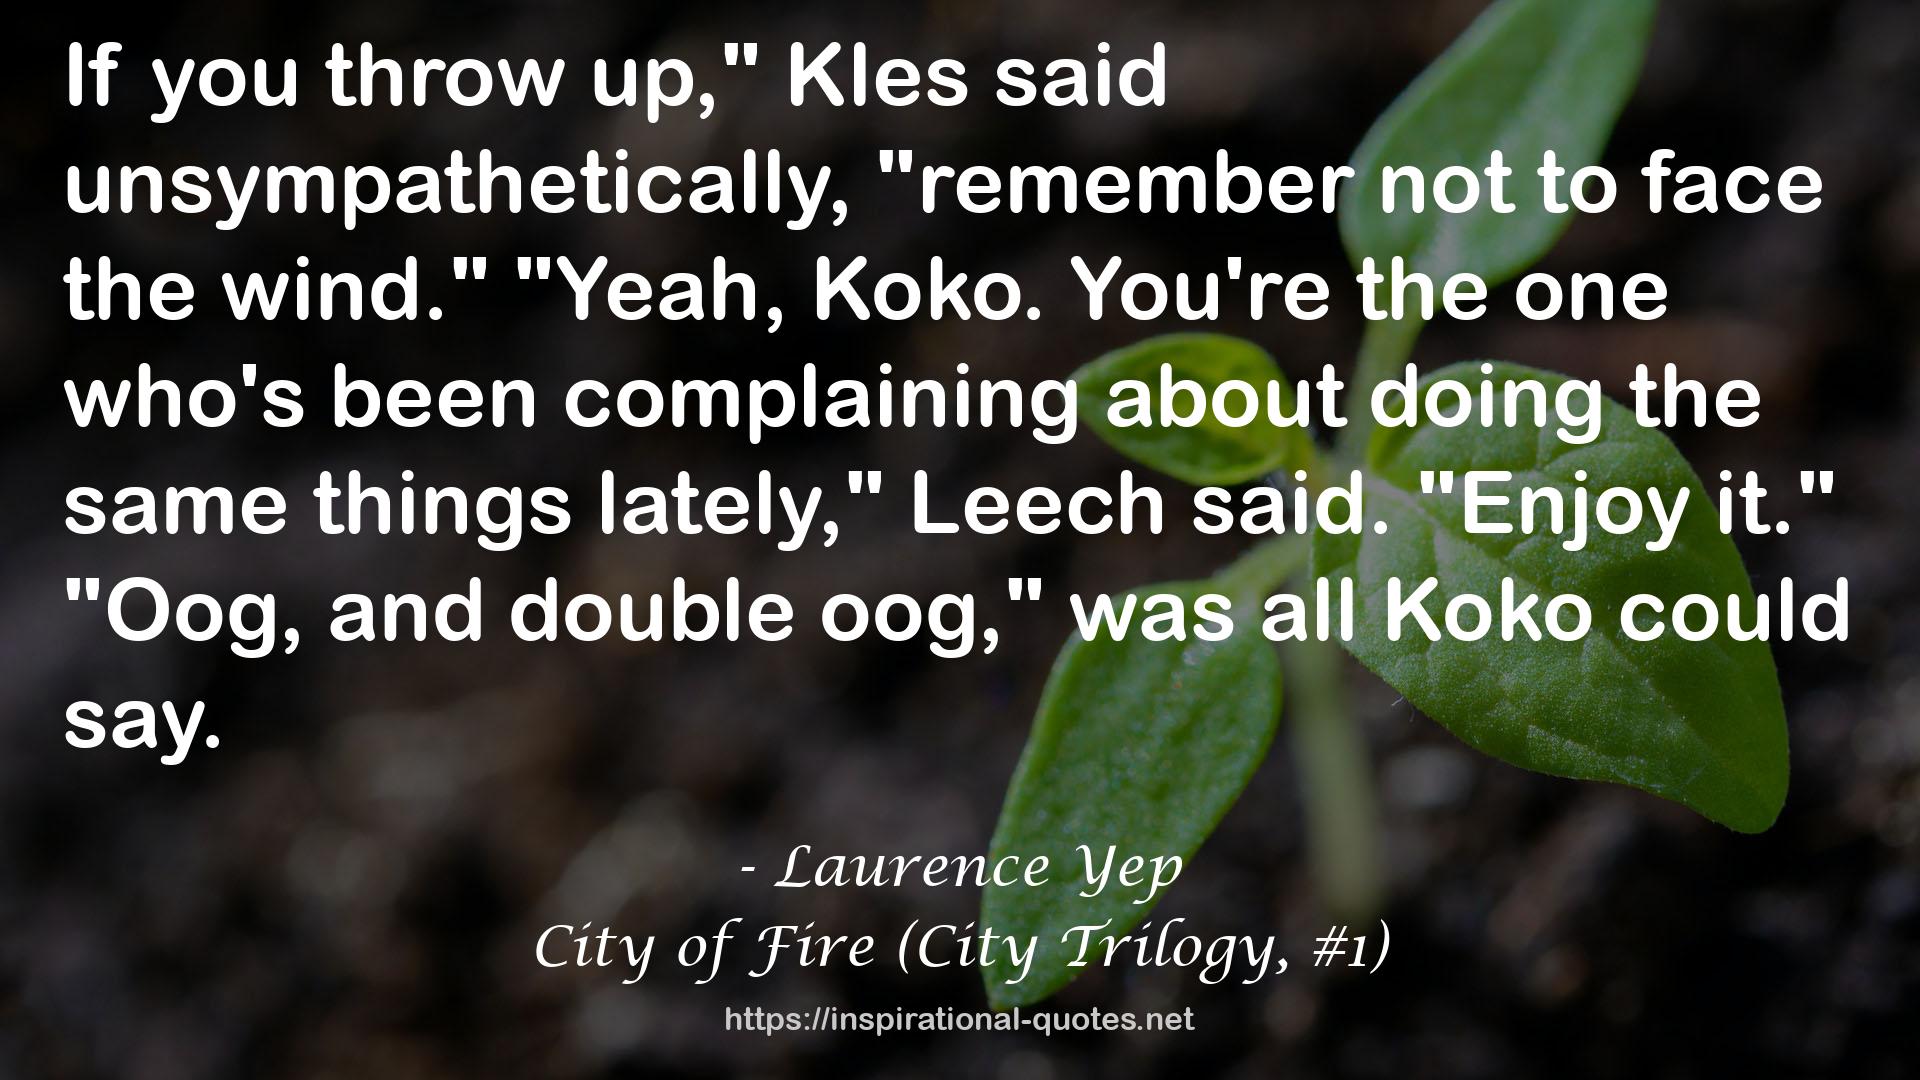 City of Fire (City Trilogy, #1) QUOTES